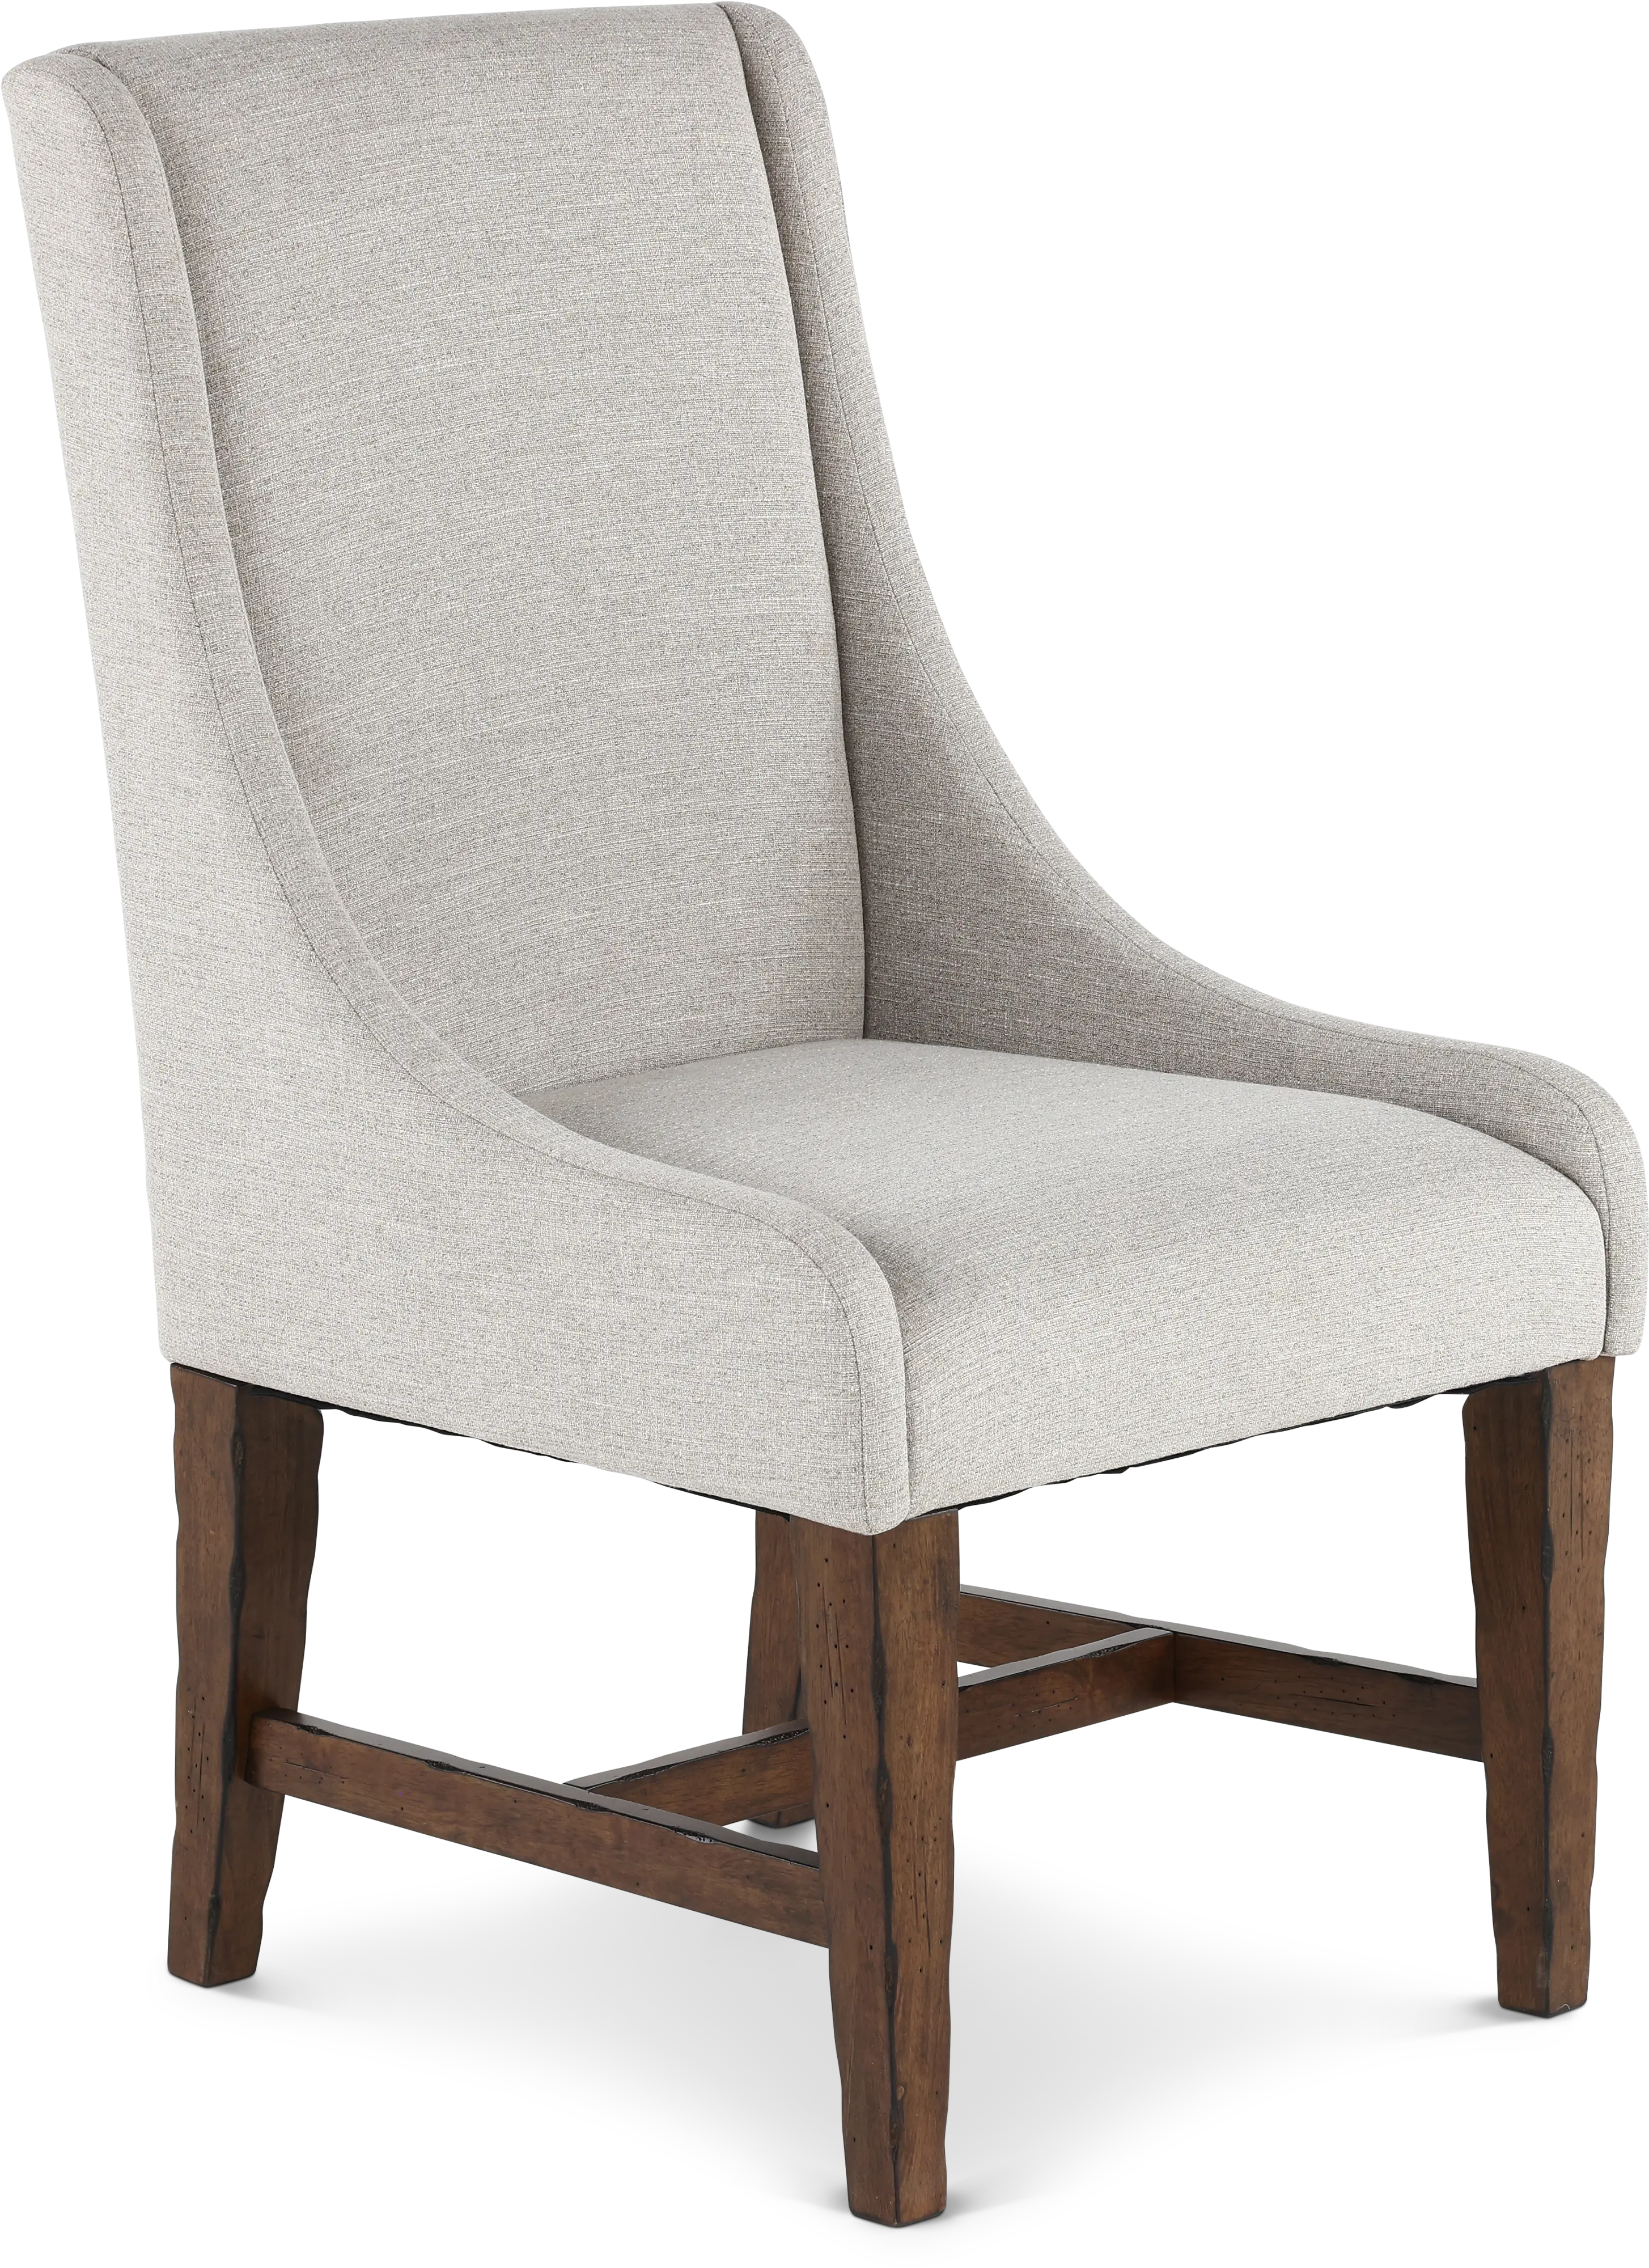 Villa Beige Upholstered Dining Chair